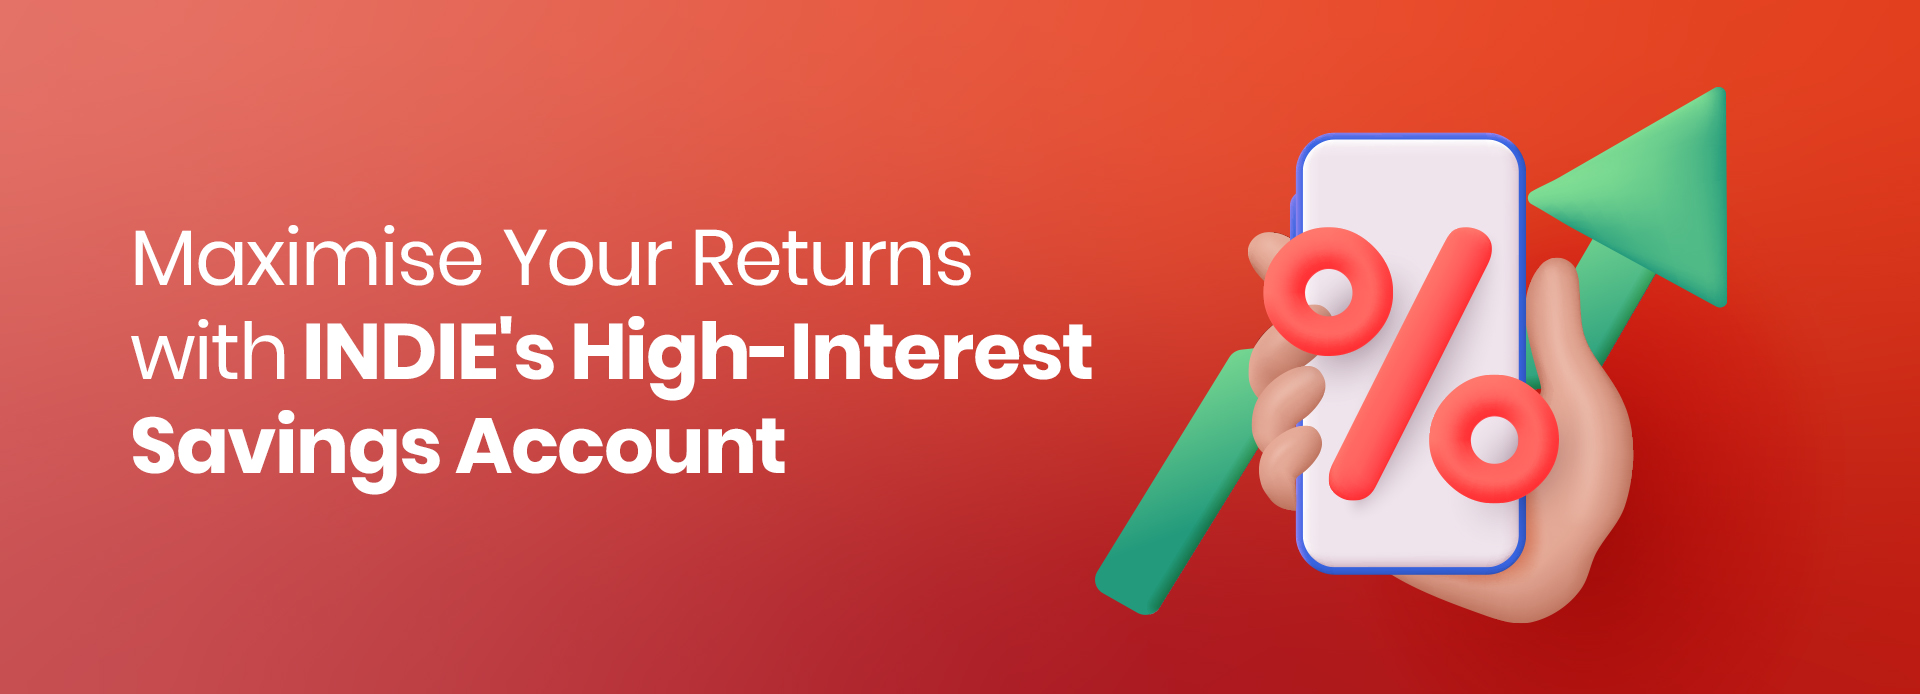 Maximise your returns with INDIE’s high-interest savings account